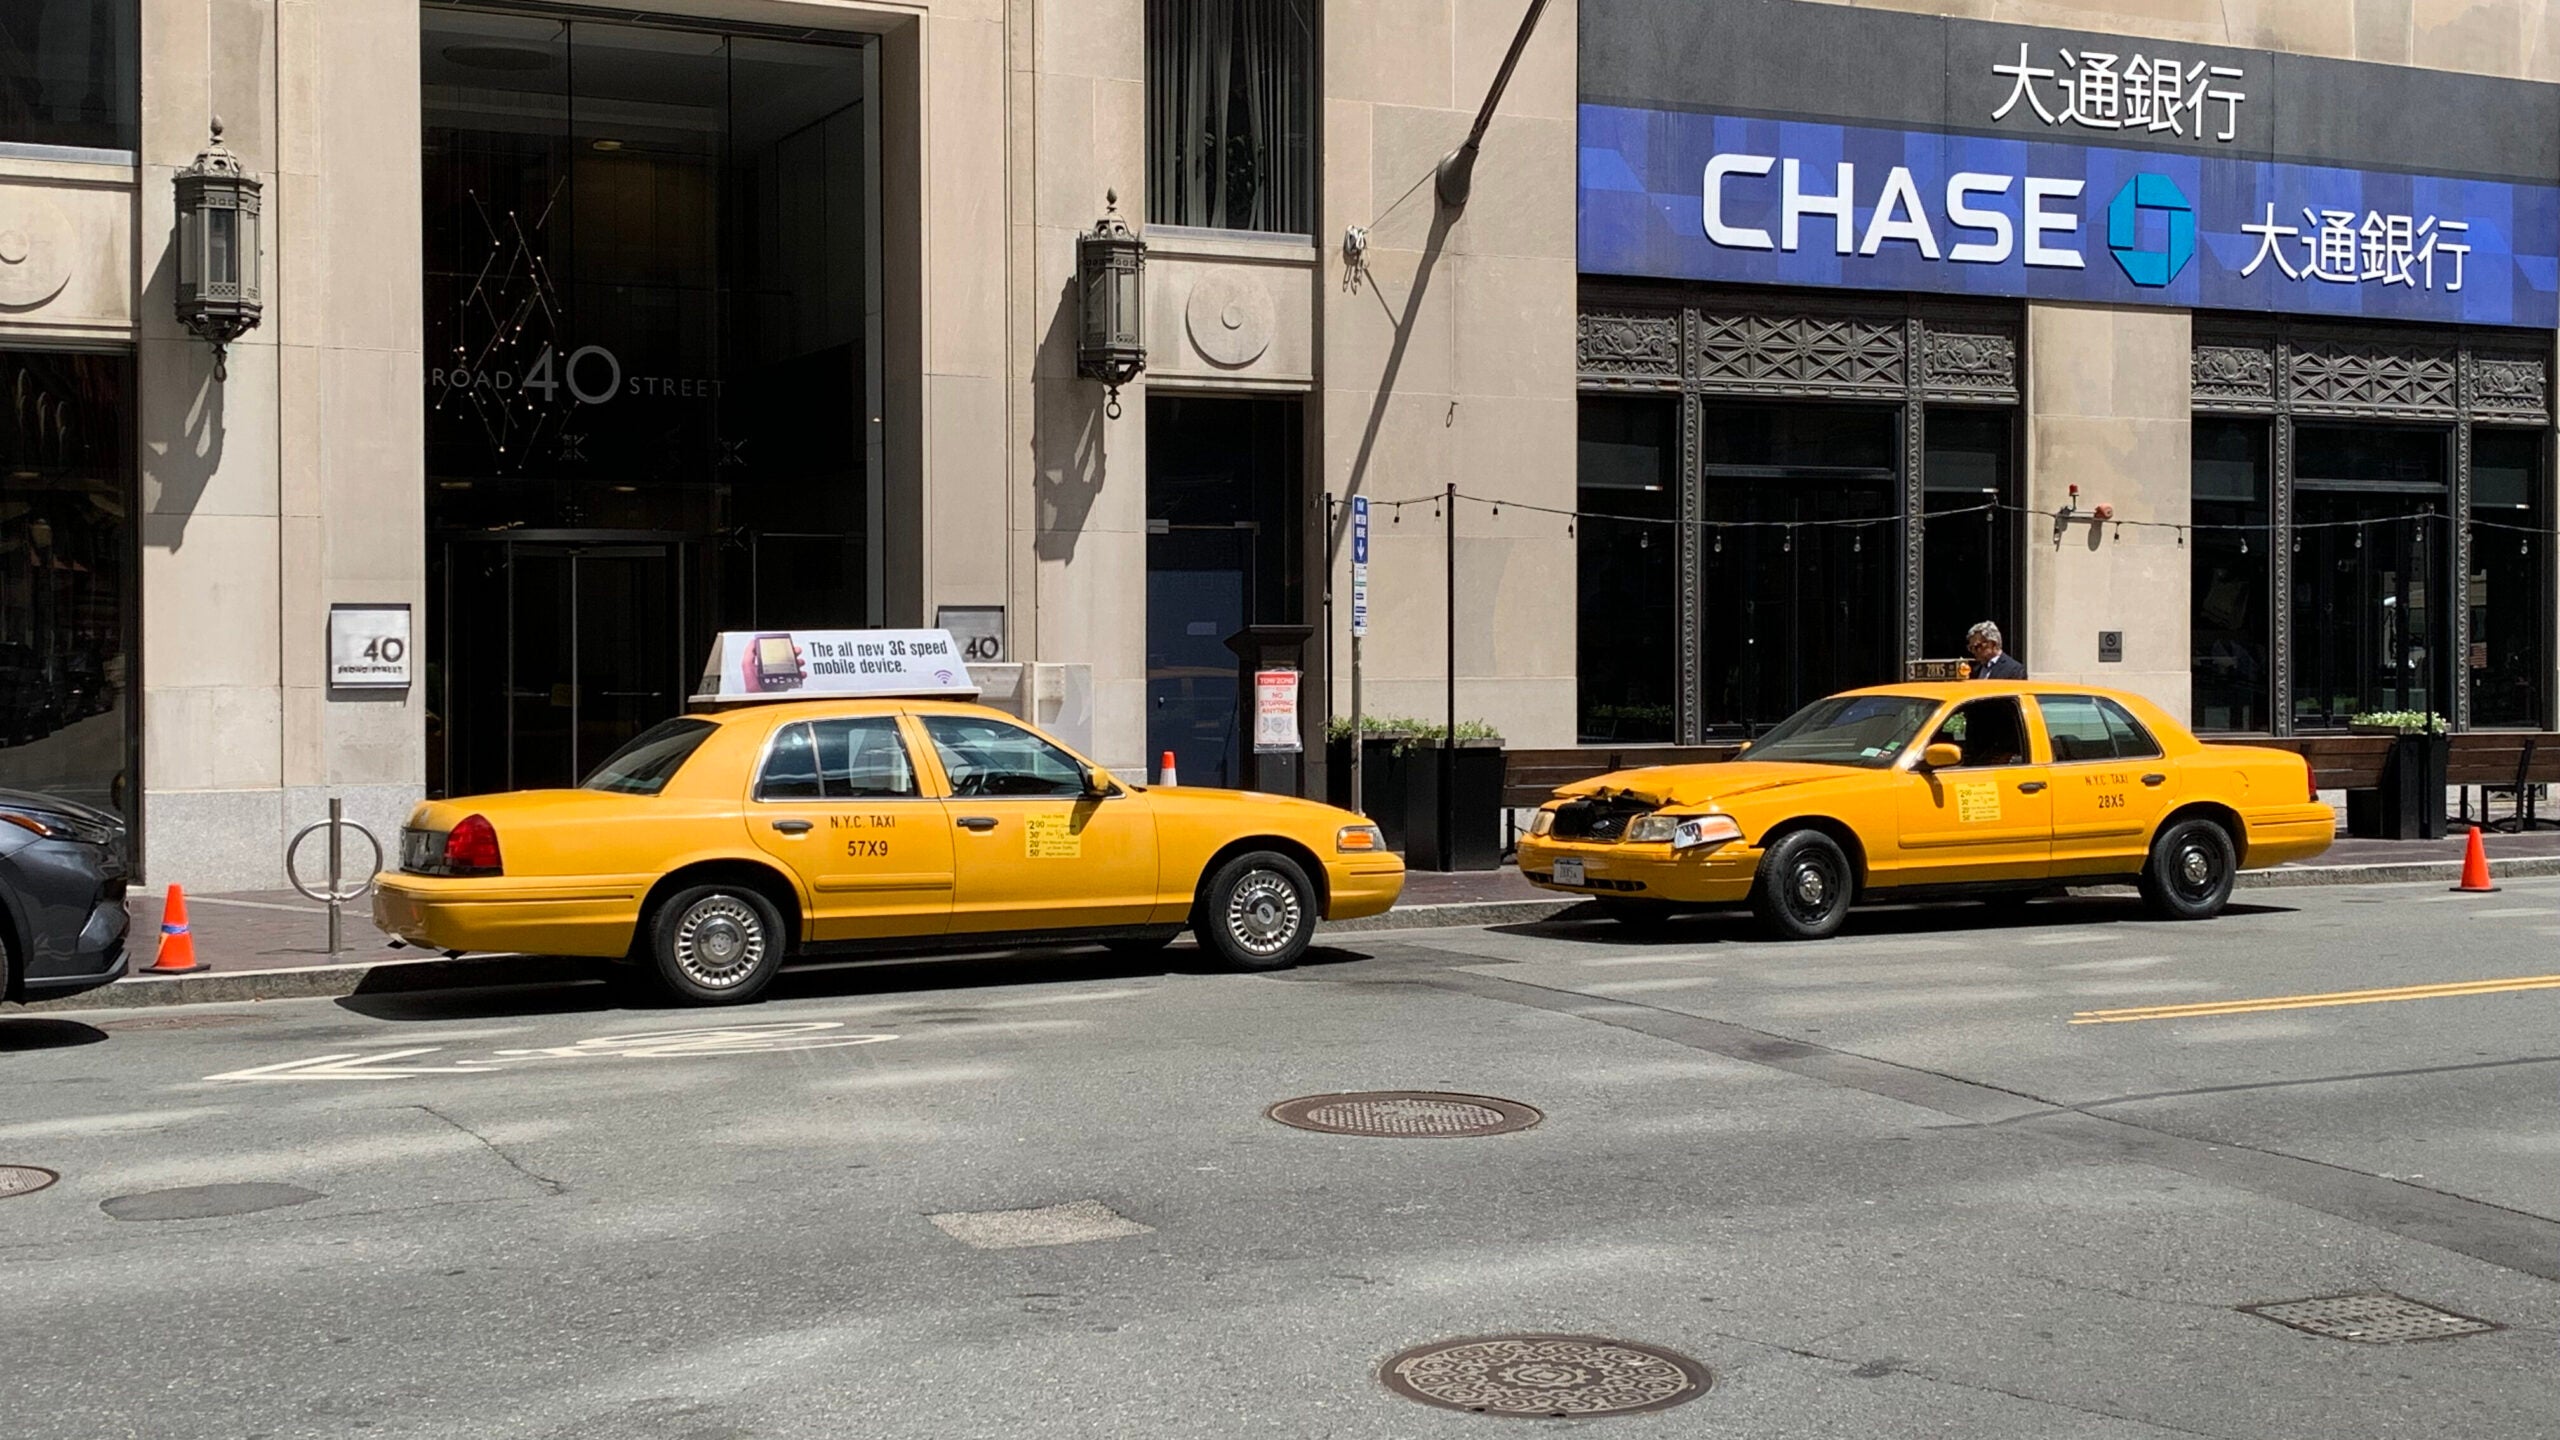 Two cabs used for filming the upcoming Sony Marvel movie 